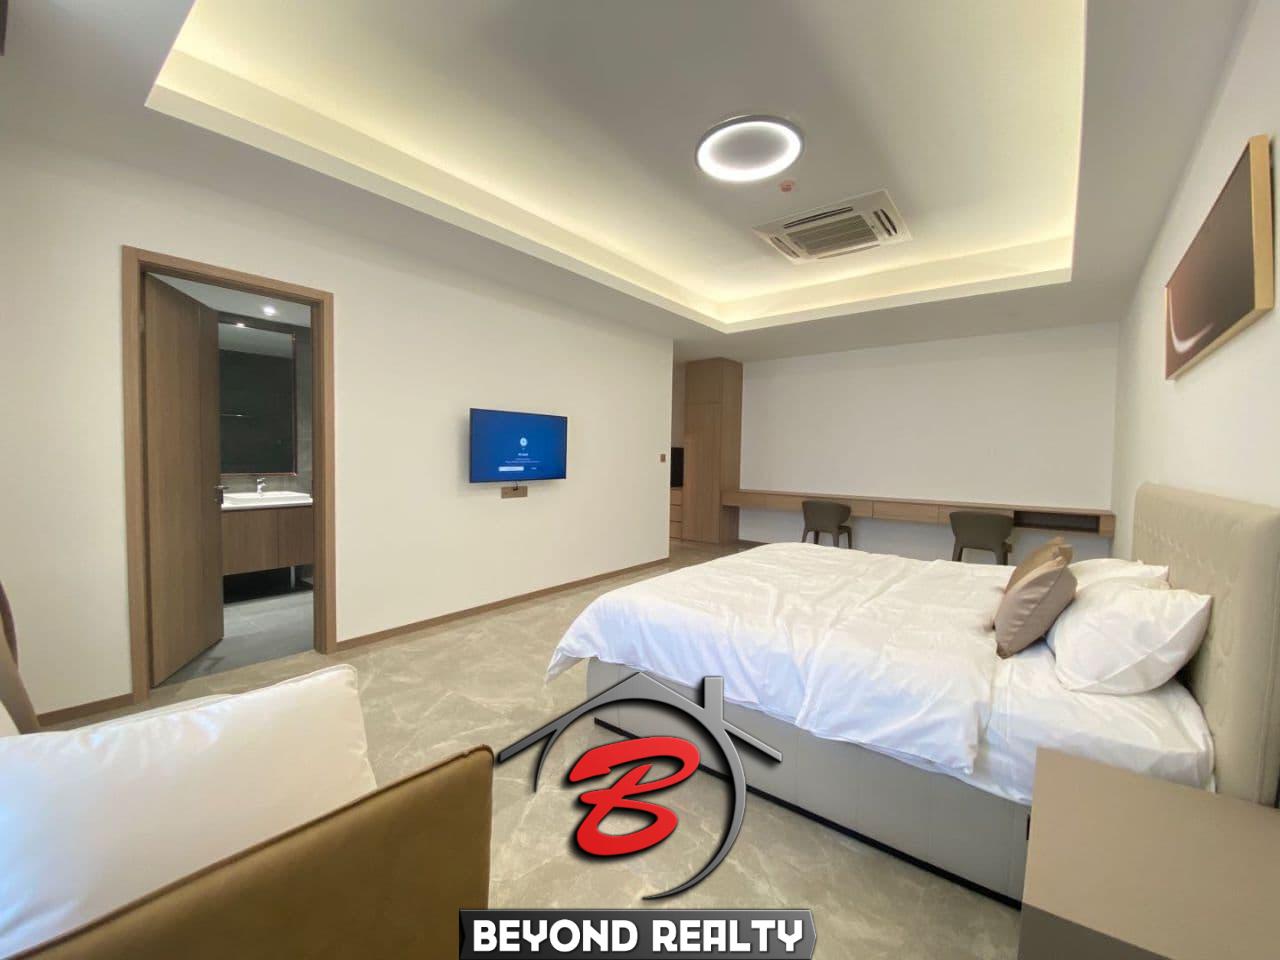 a bedroom of the 3-bedroom luxury spacious serviced flat for rent